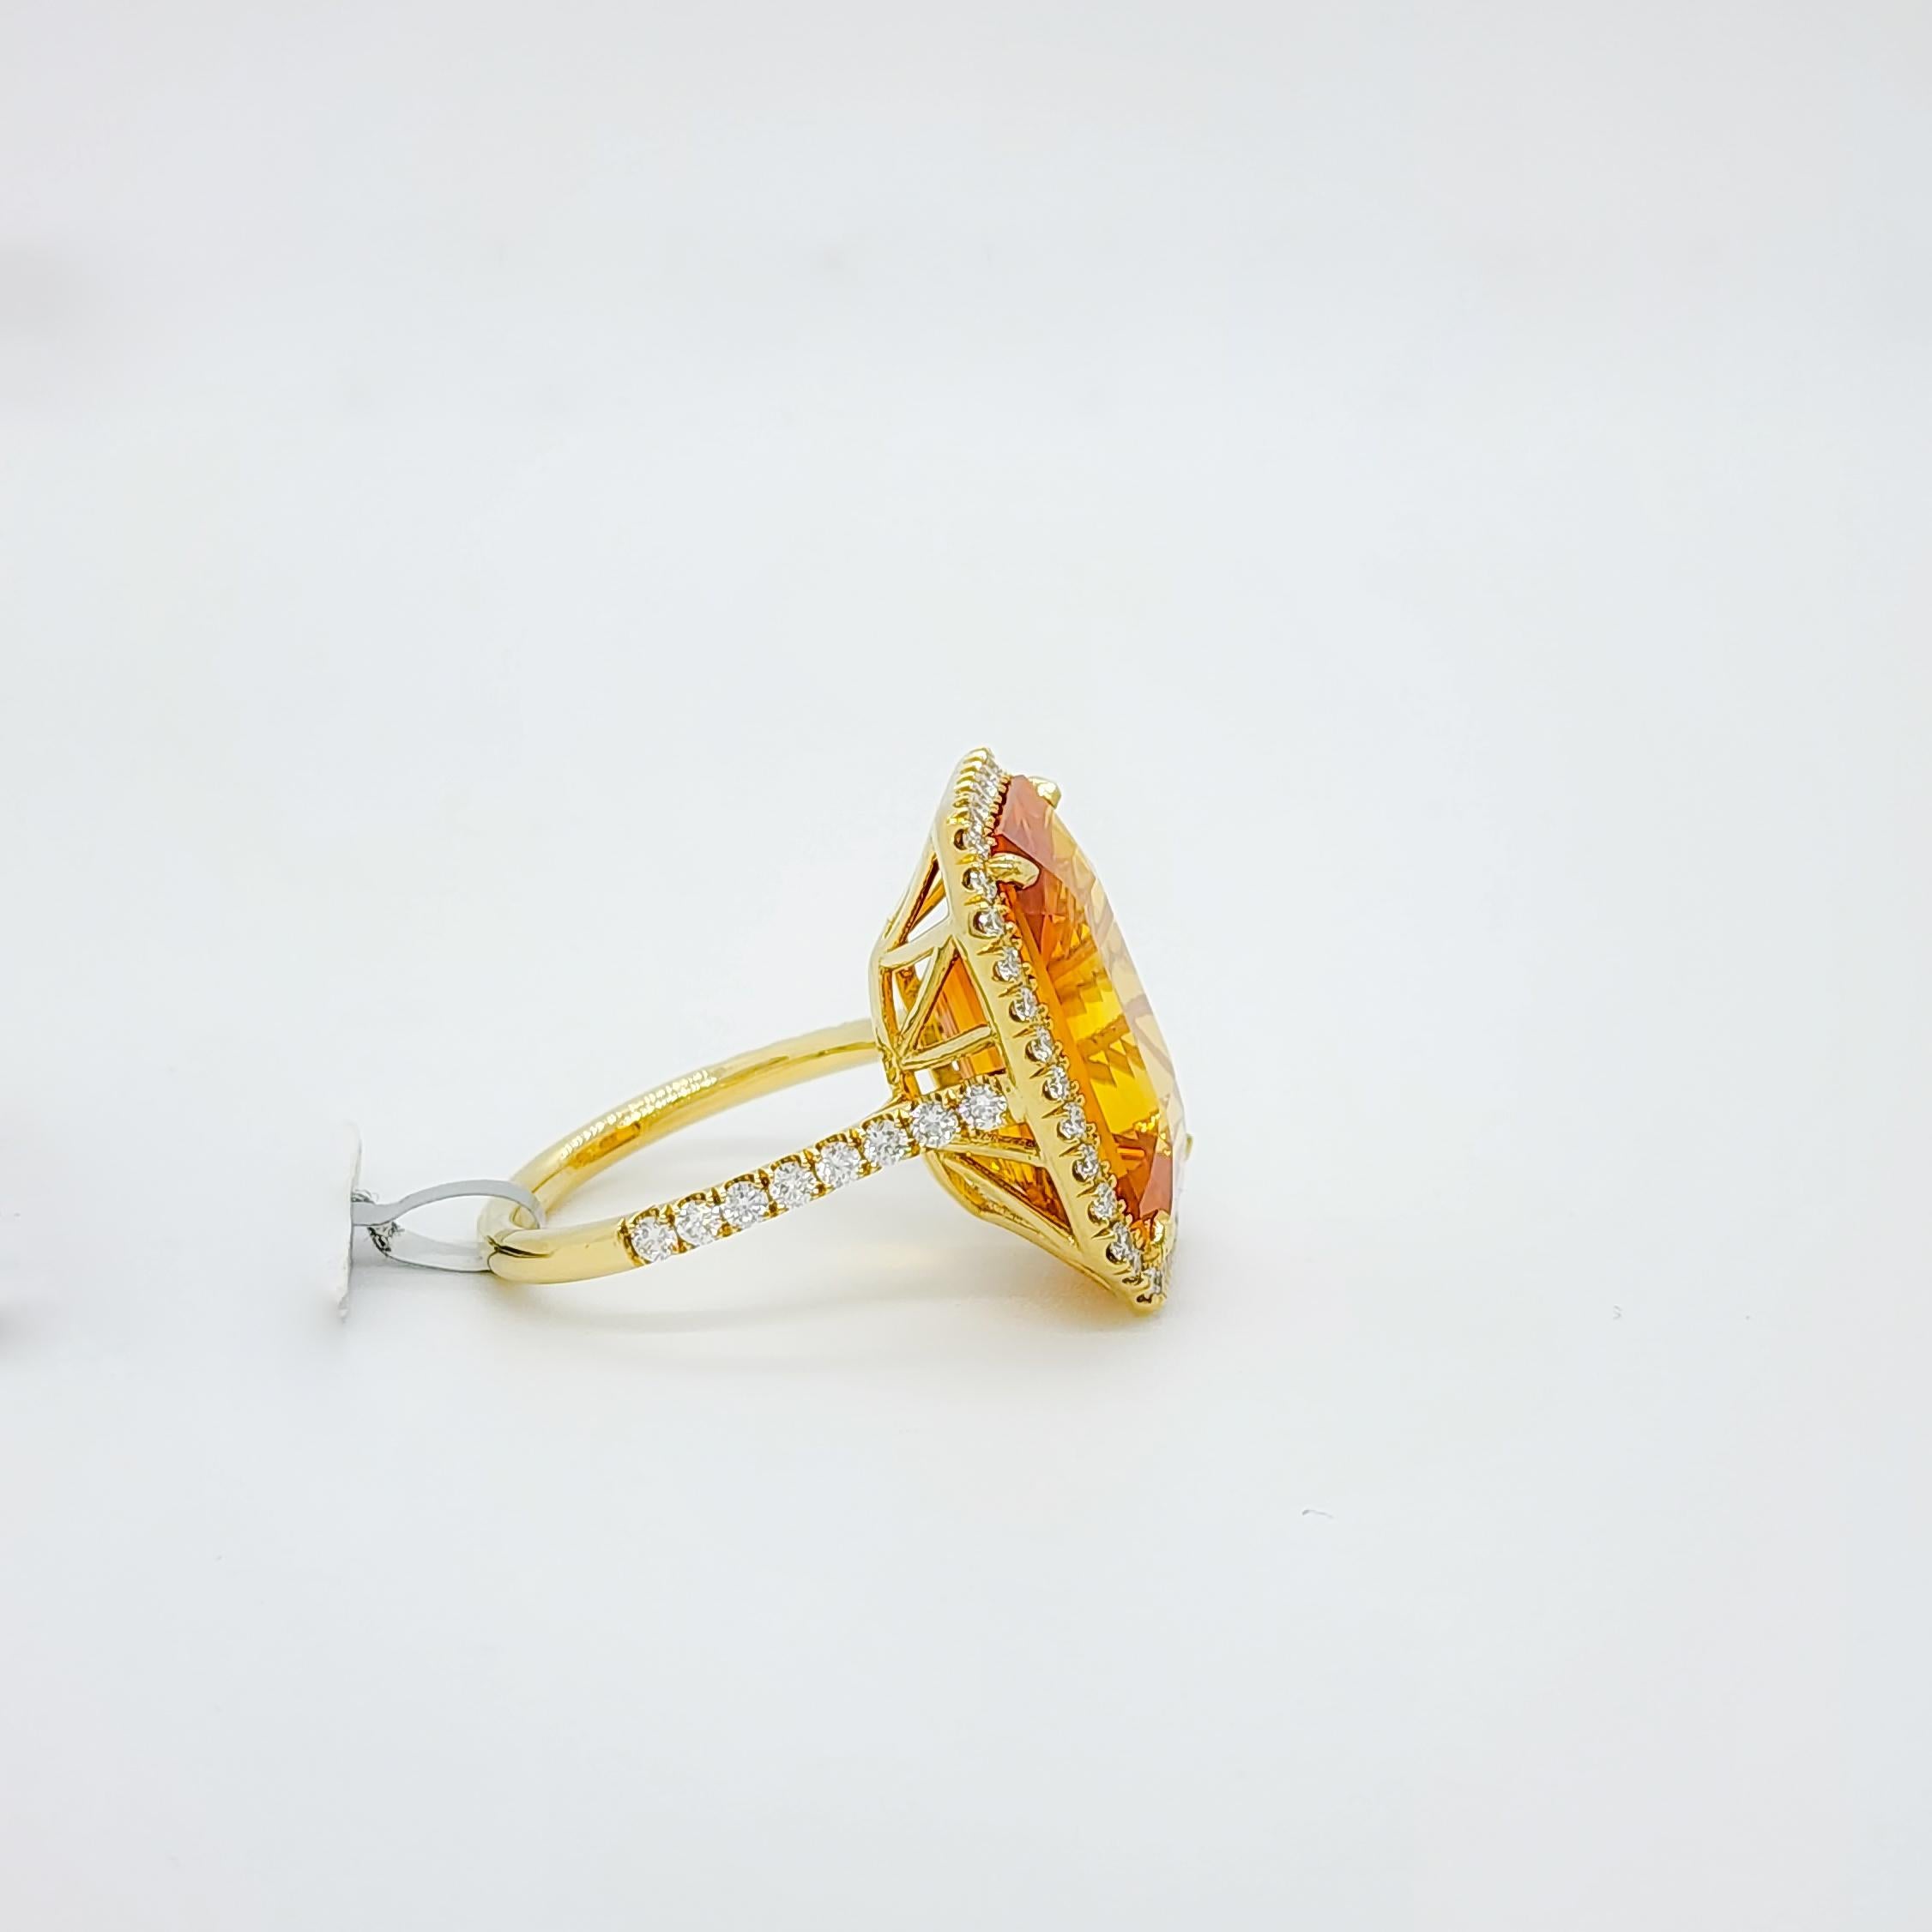 GIA Yellowish Orange Sapphire and White Diamond Cocktail Ring in 18k For Sale 3